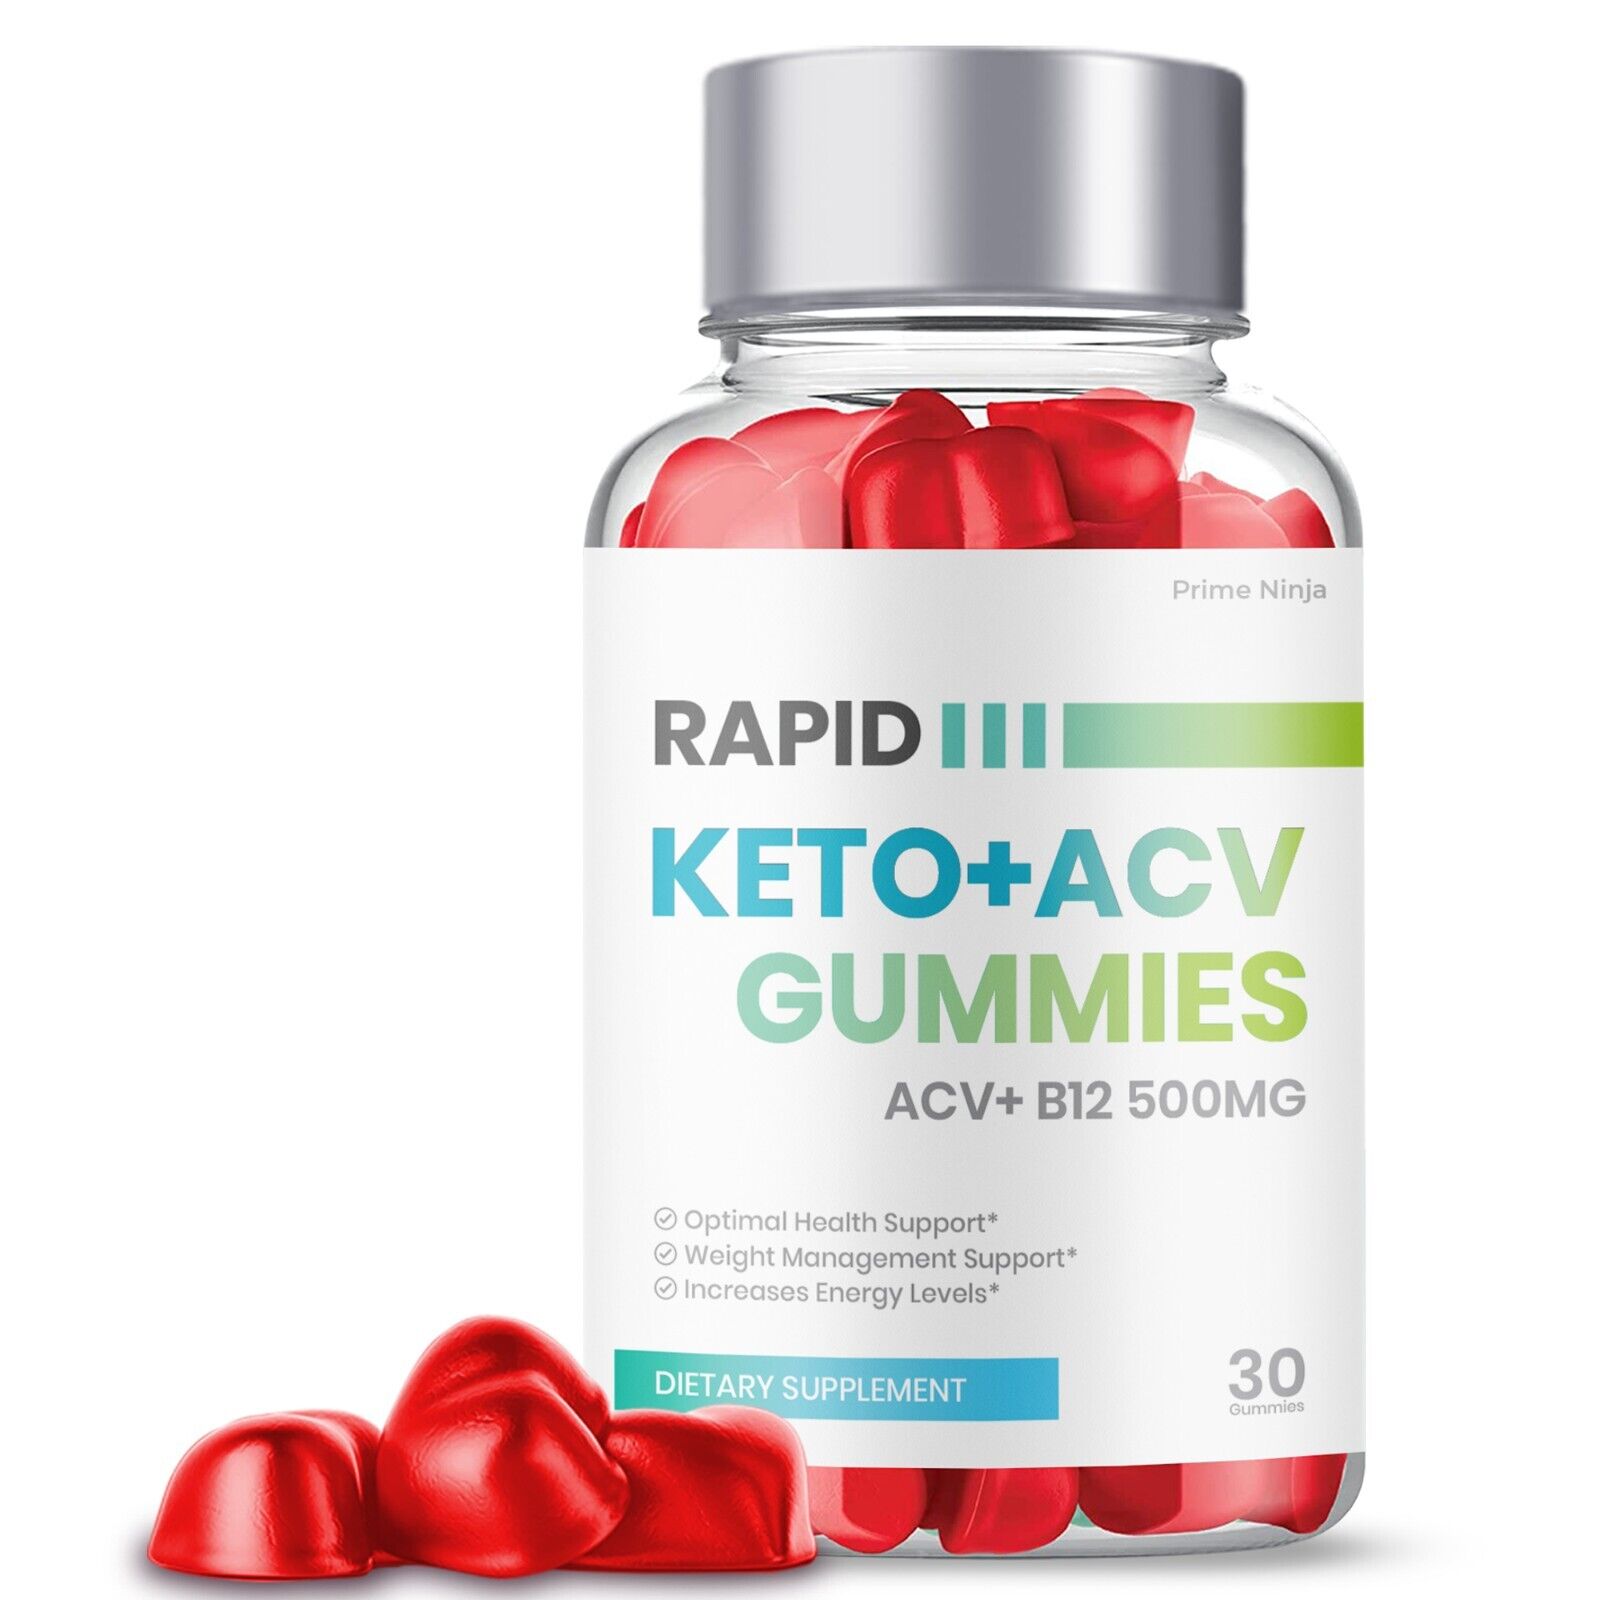 Rapid Keto ACV Gummies for Weight Management